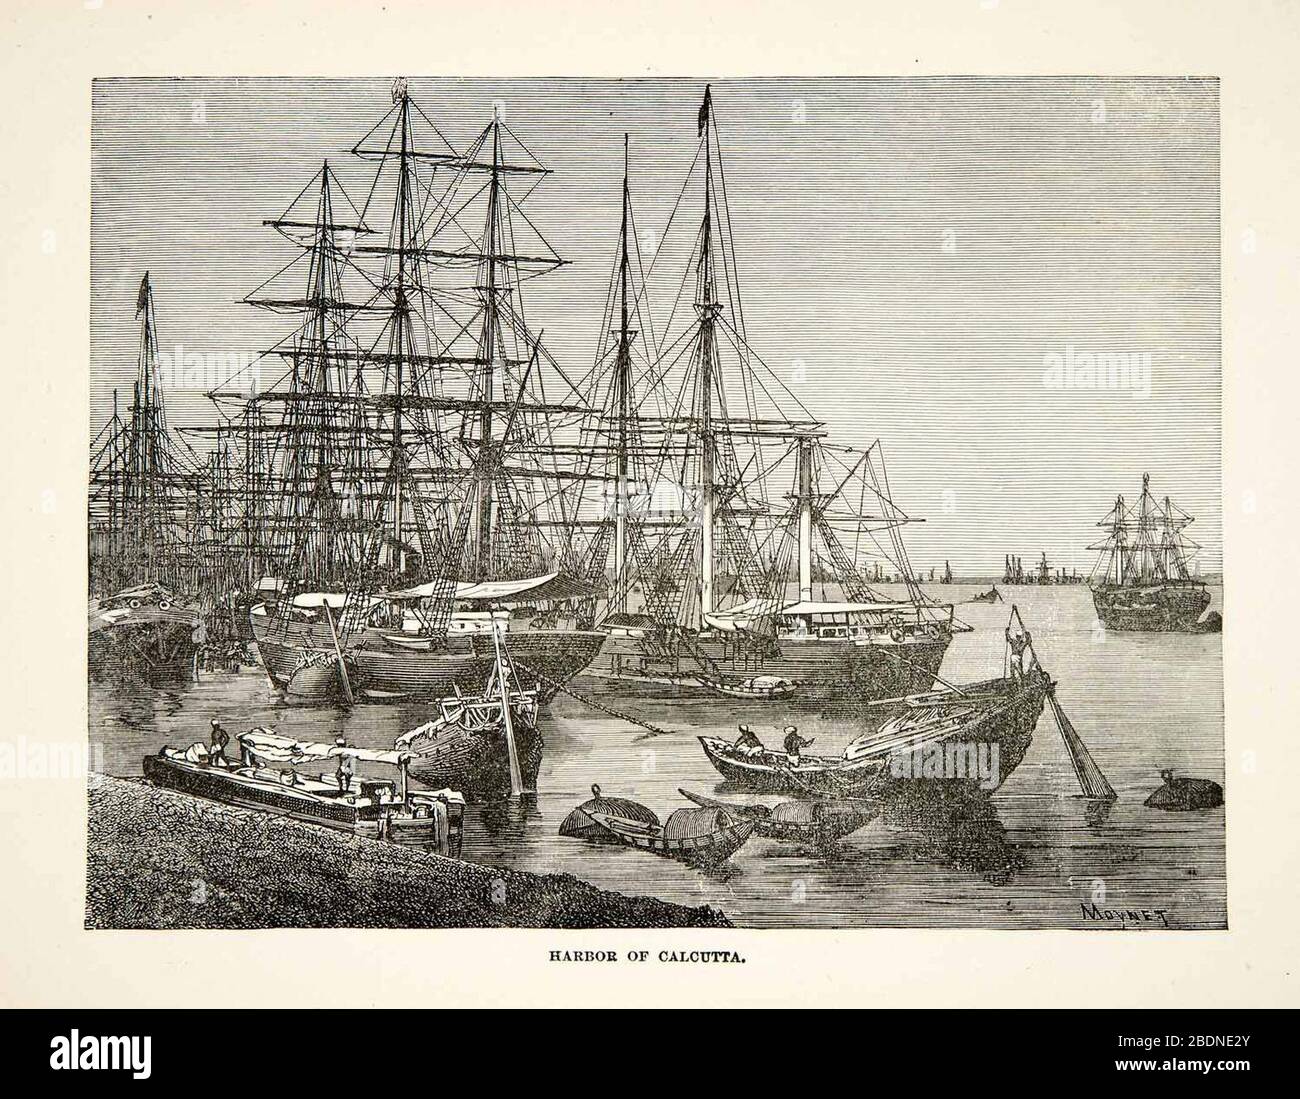 Harbor of Calcutta, an engraving from Countries of the World, published by Cassell & Company, c.1885. Stock Photo